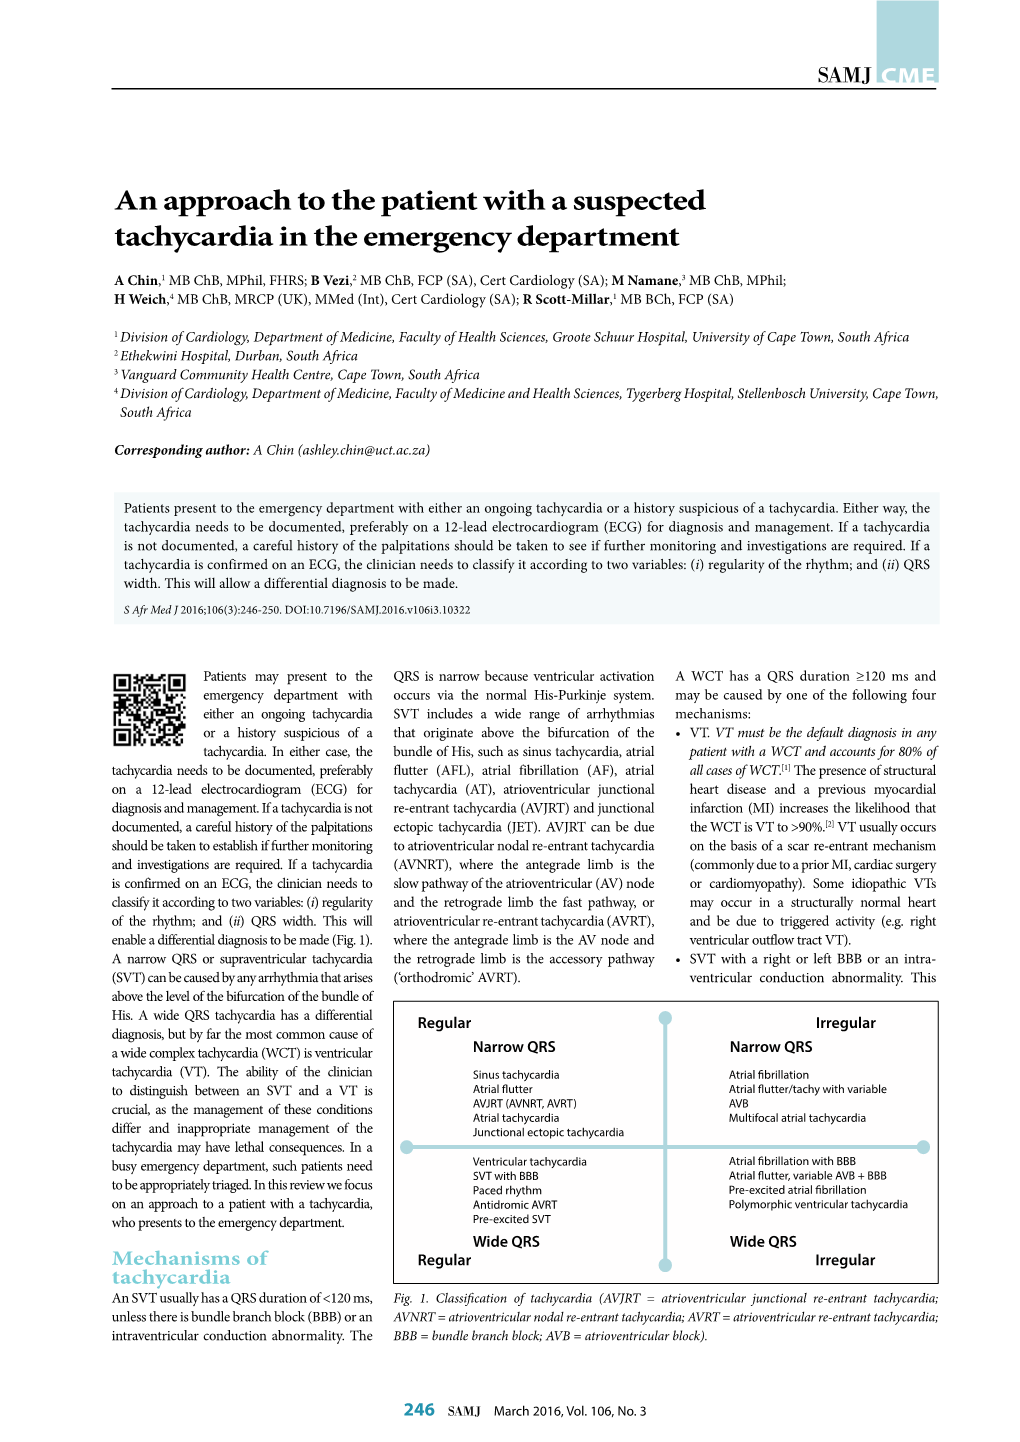 An Approach to the Patient with a Suspected Tachycardia in the Emergency Department